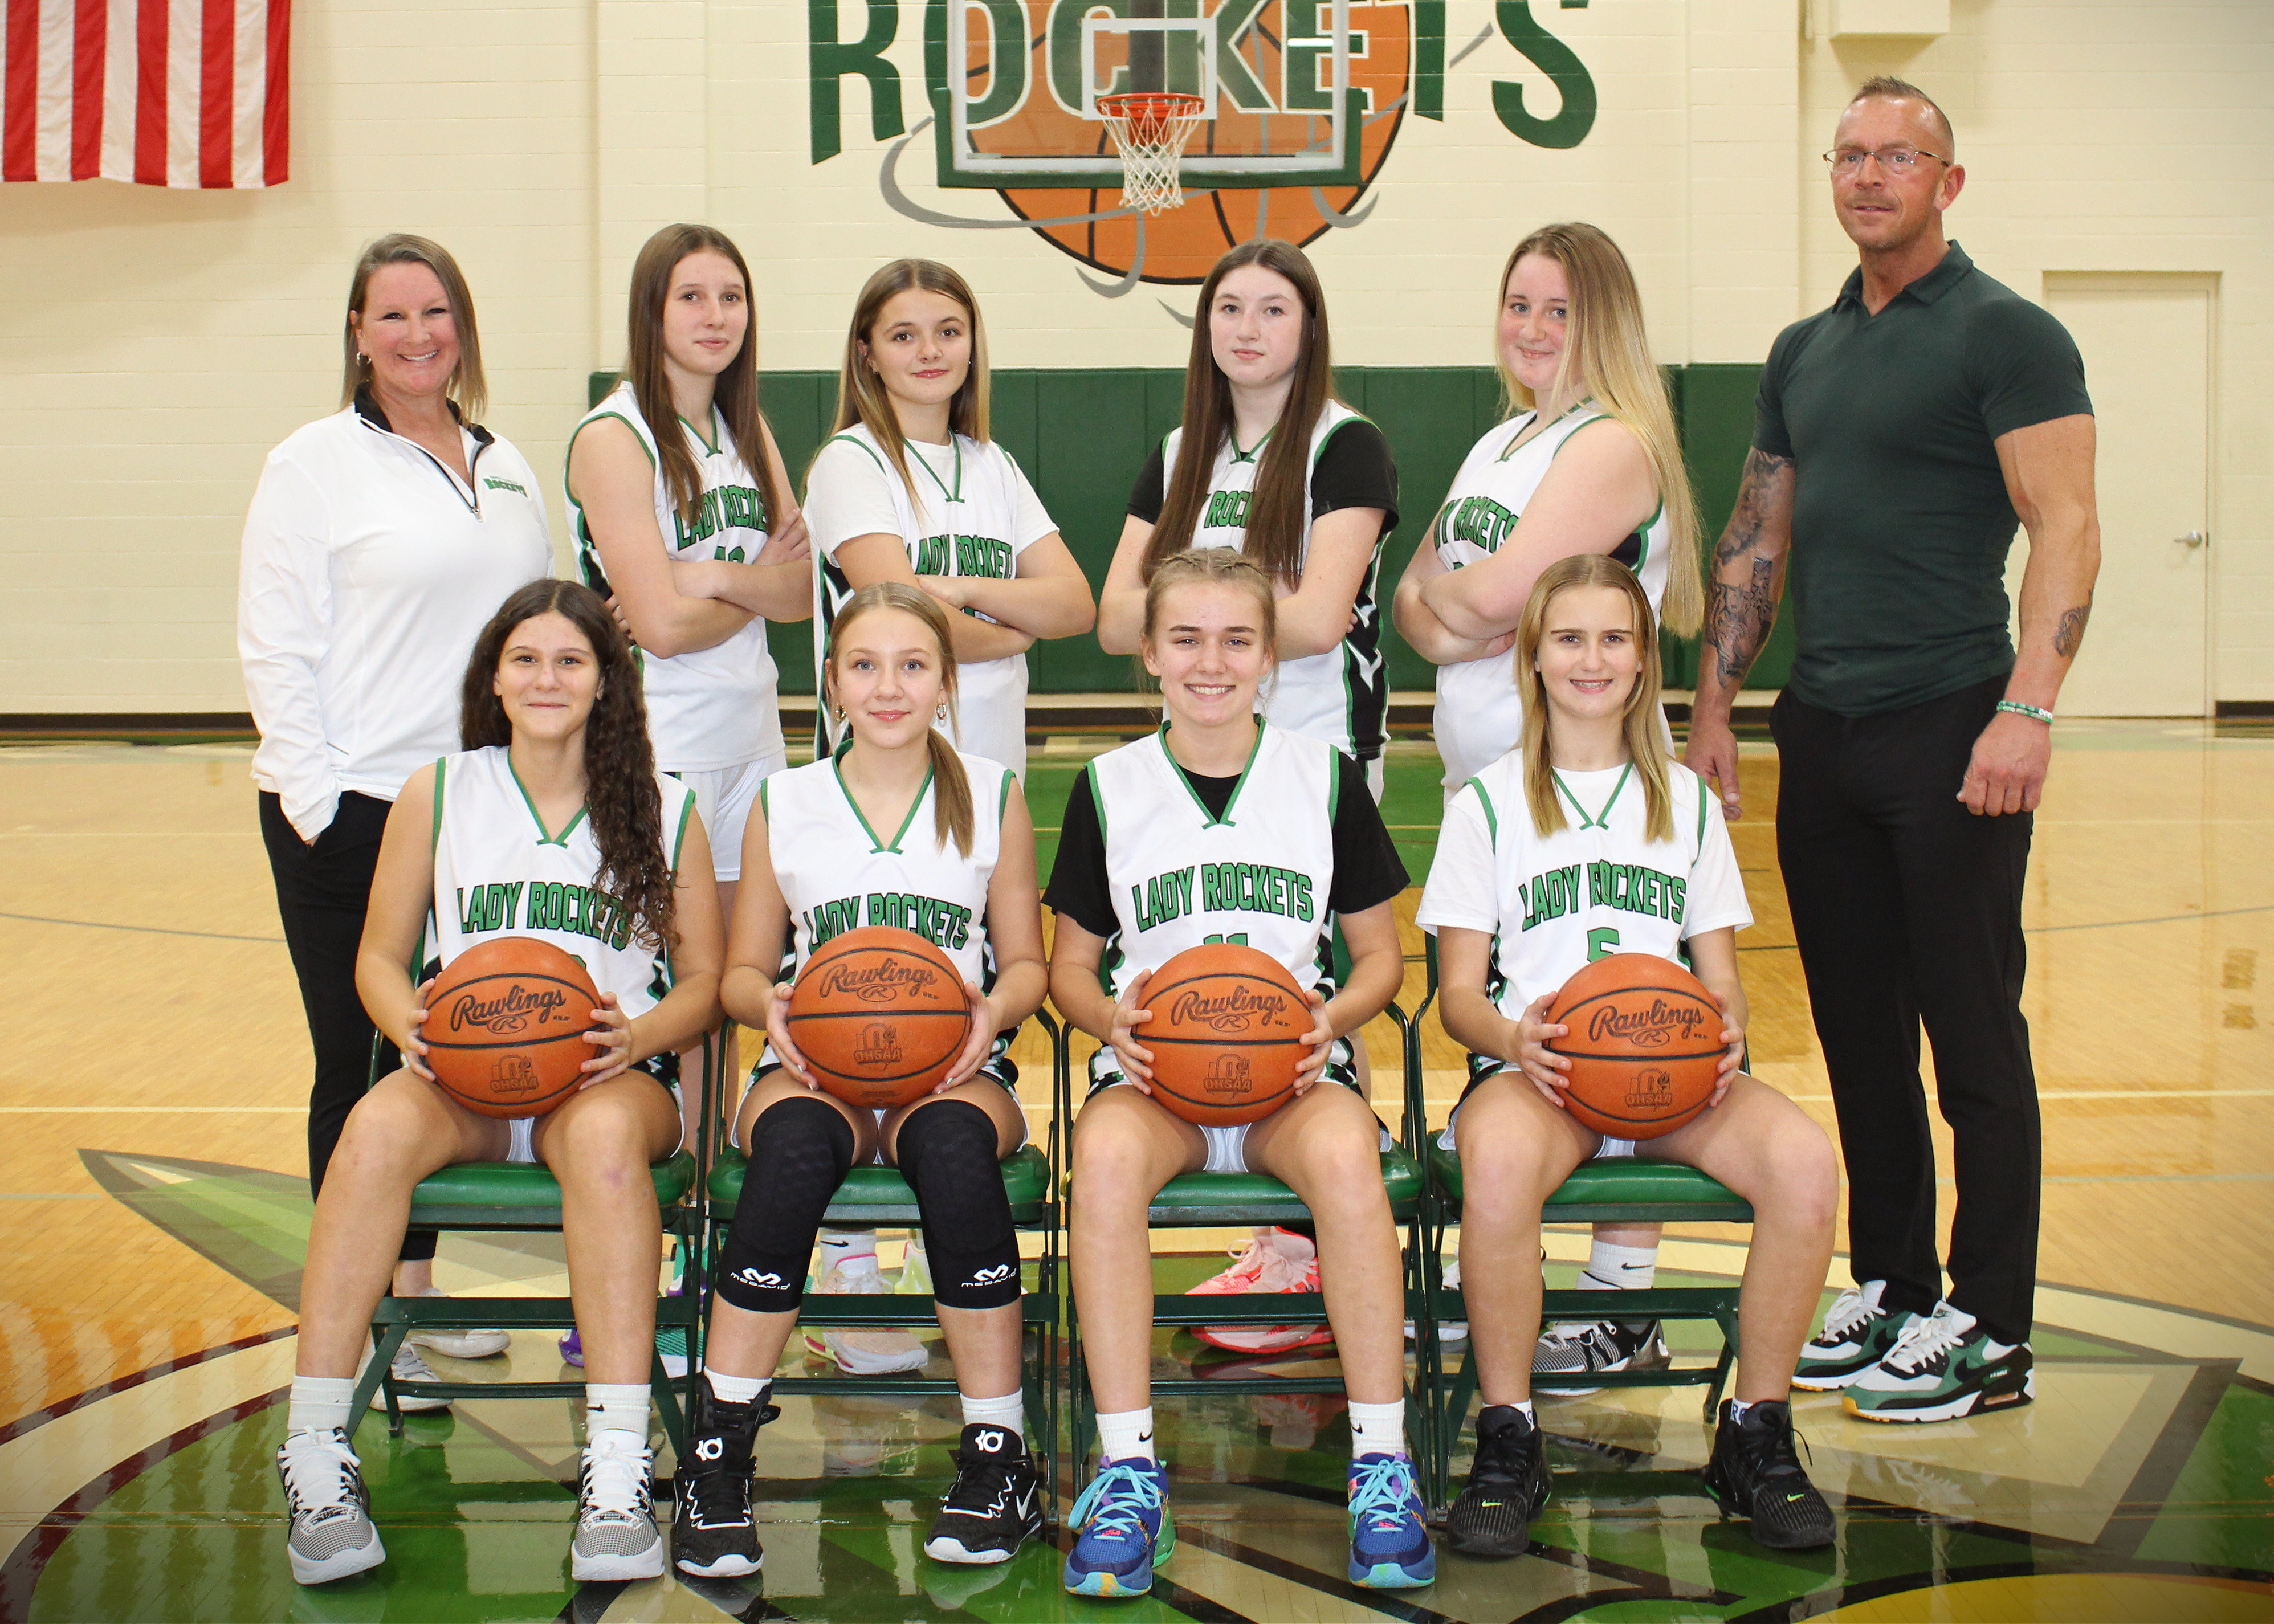 8th grade girls basketball team picture